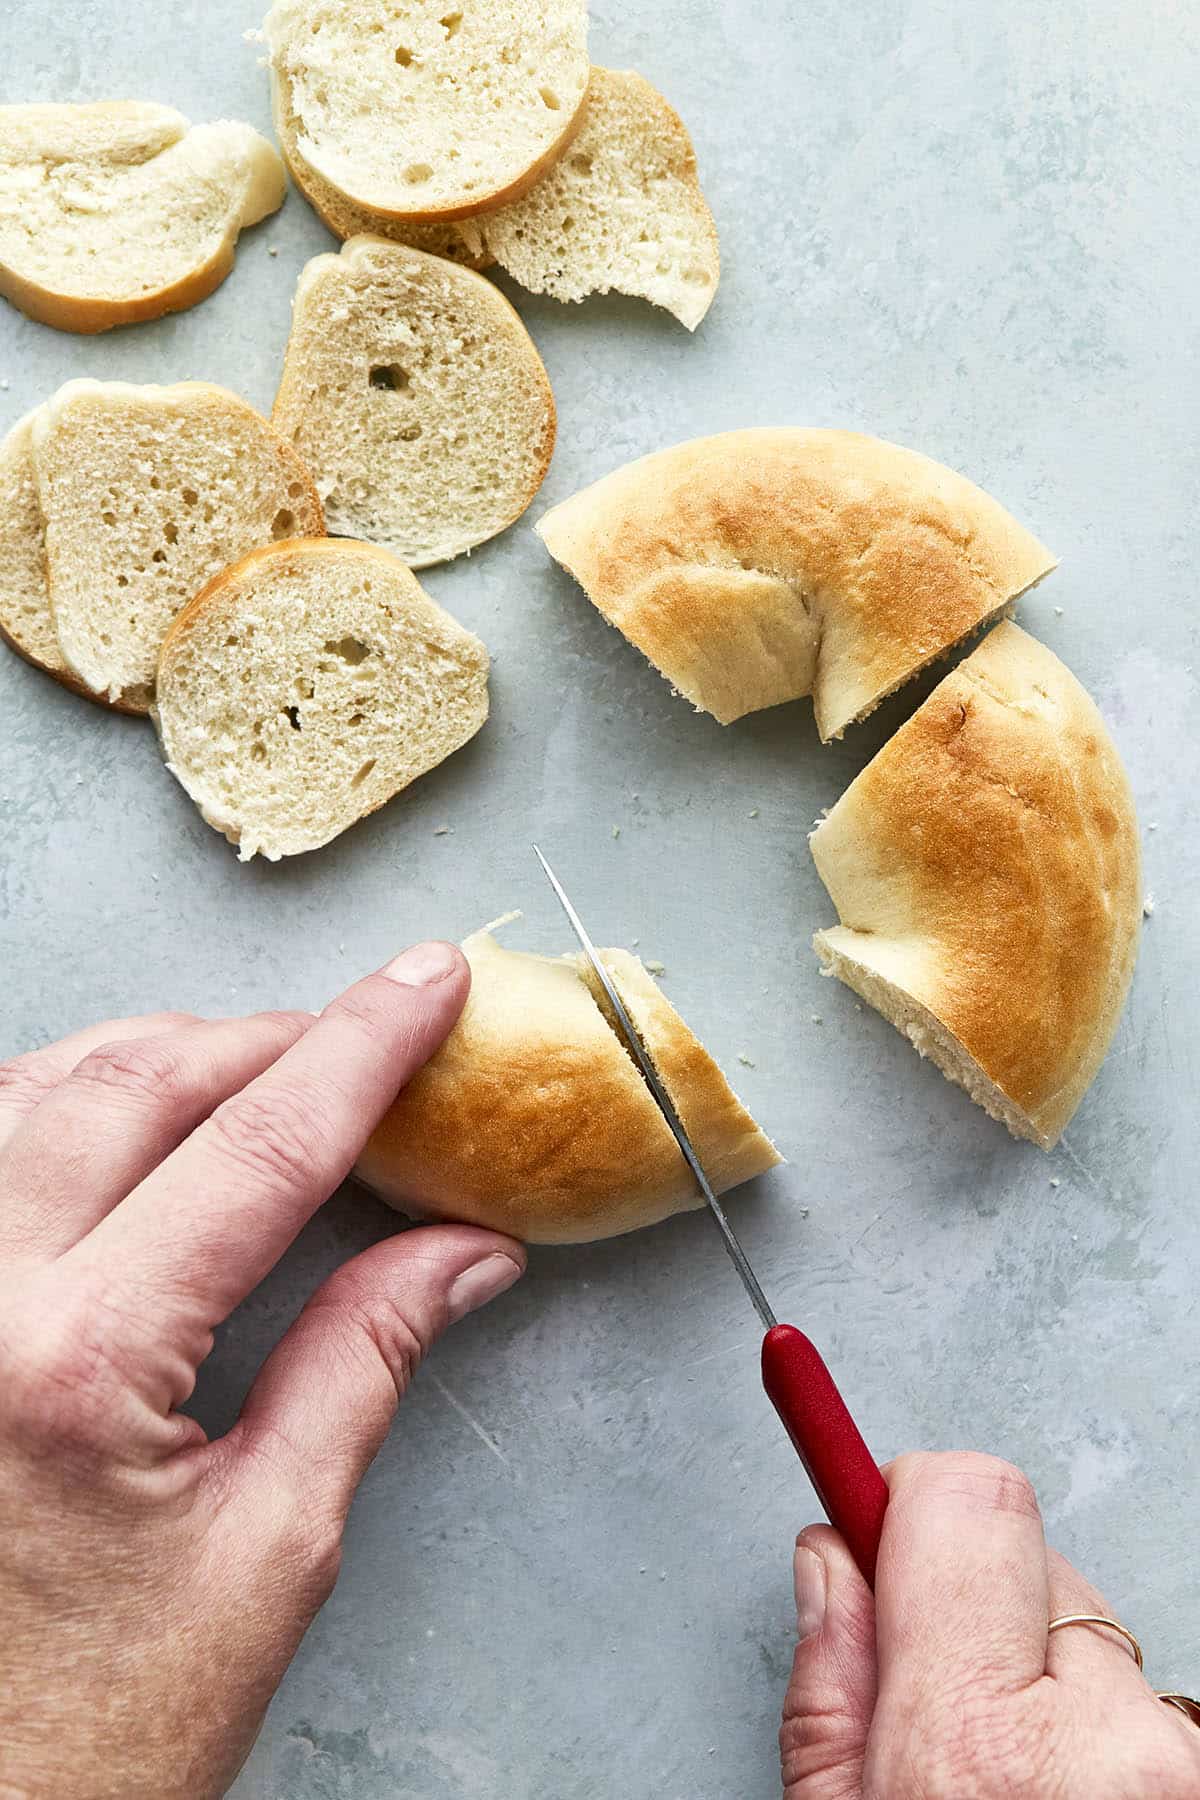 Hands using a small red knife to slice a bagel.